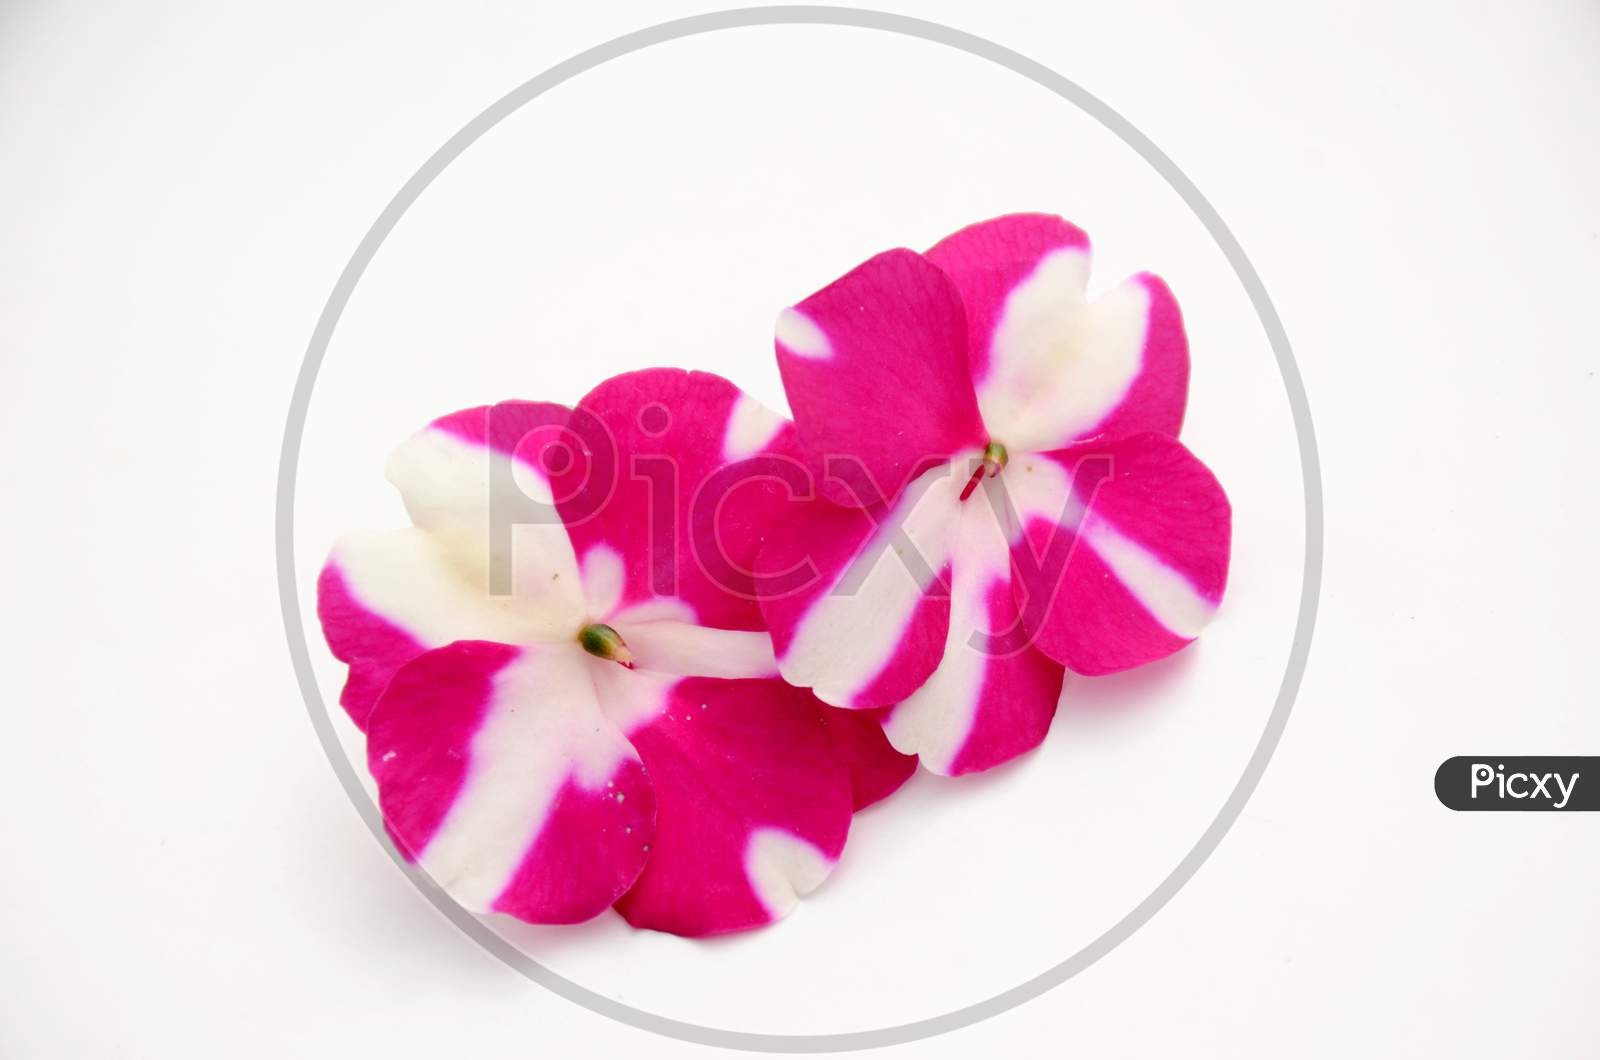 the pair of pink white flower of petunia isolated on white background.